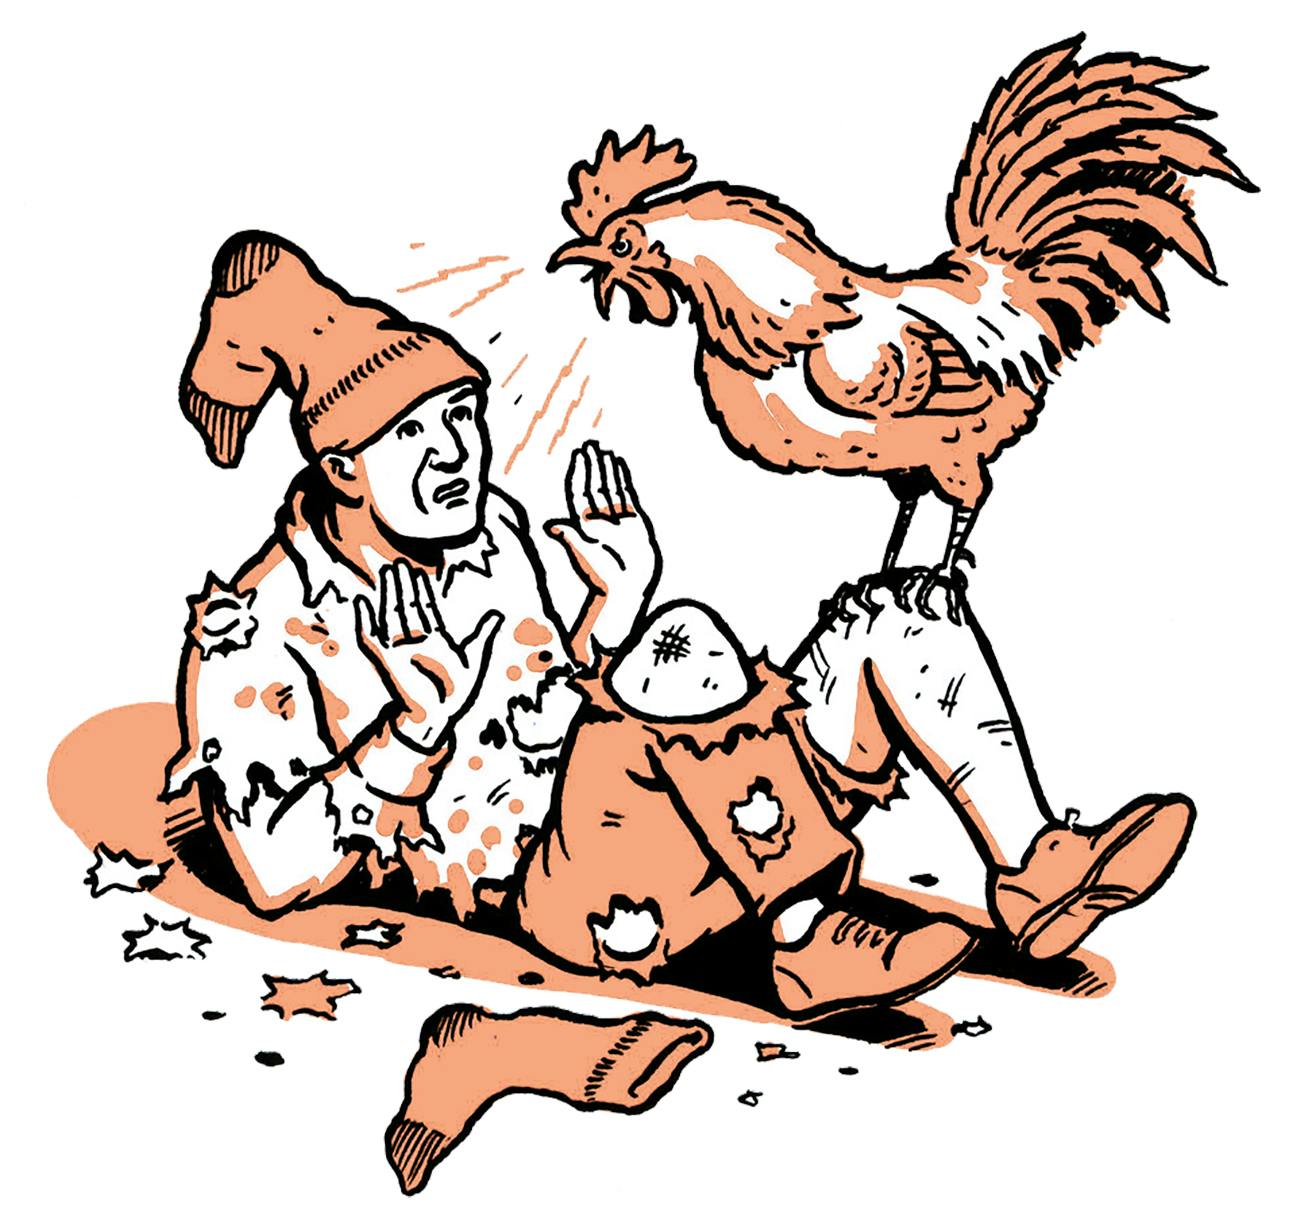 Texas saying: putting a sock on a rooster. 